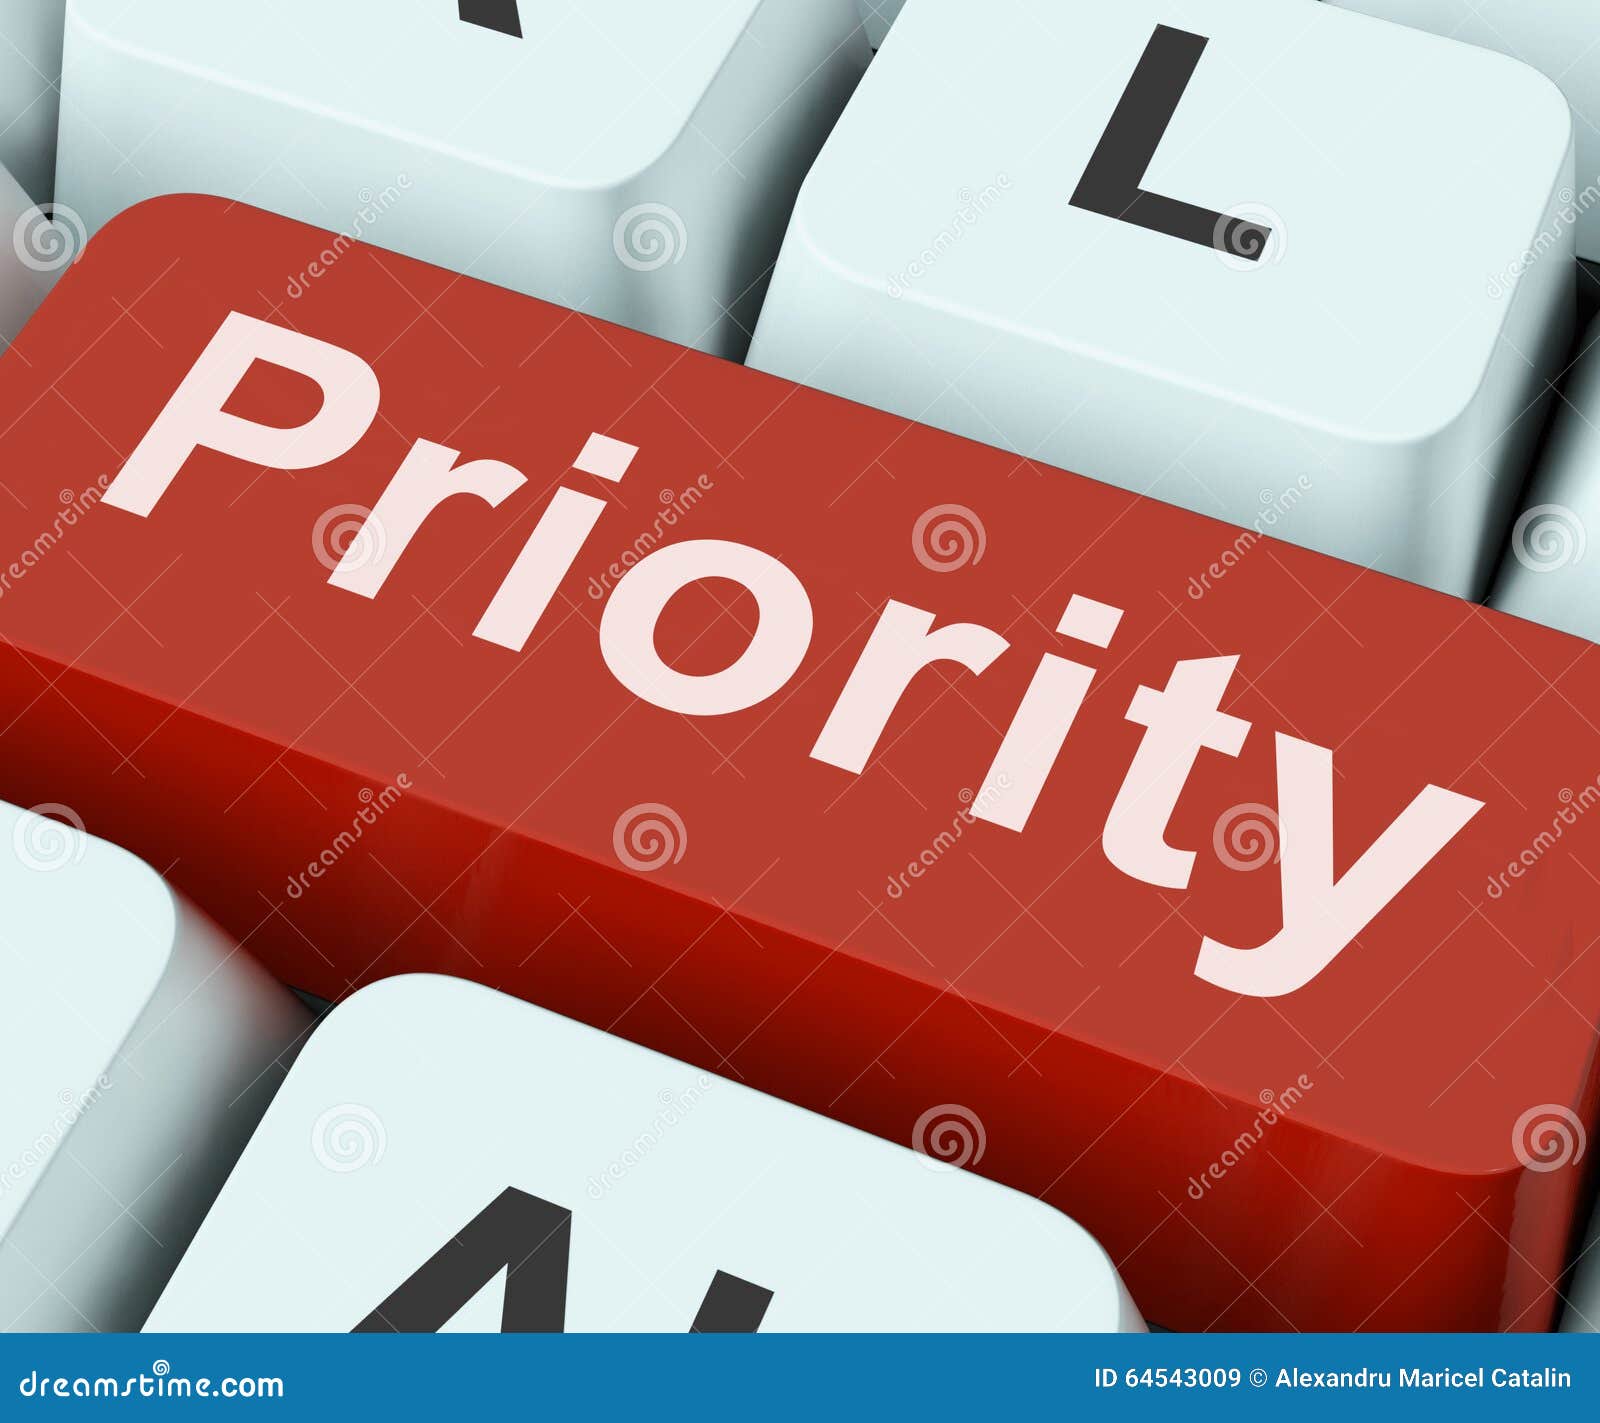 priority key means greater importance or primacy